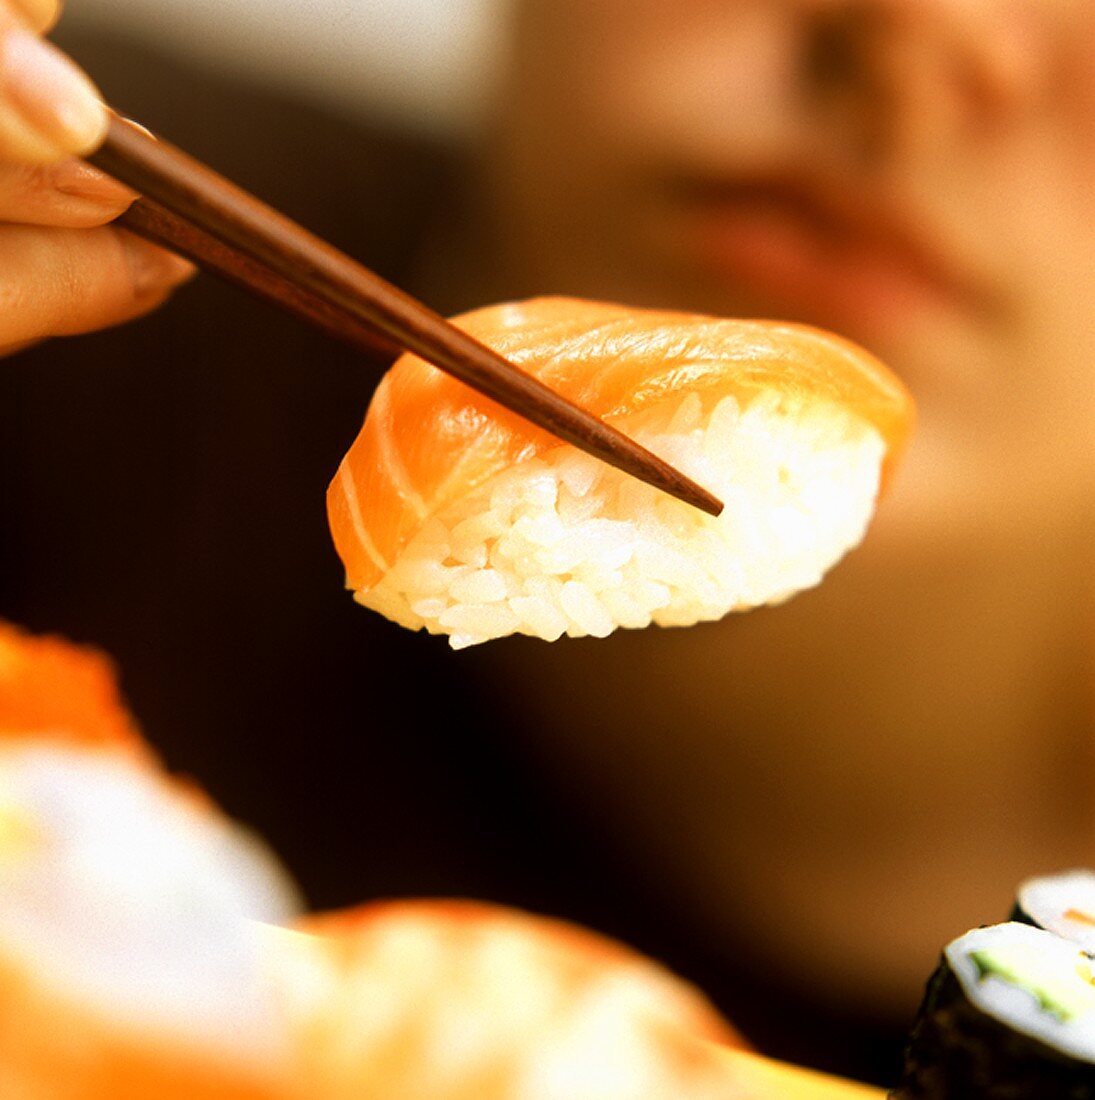 A Piece of Sushi Being Held on Chopsticks